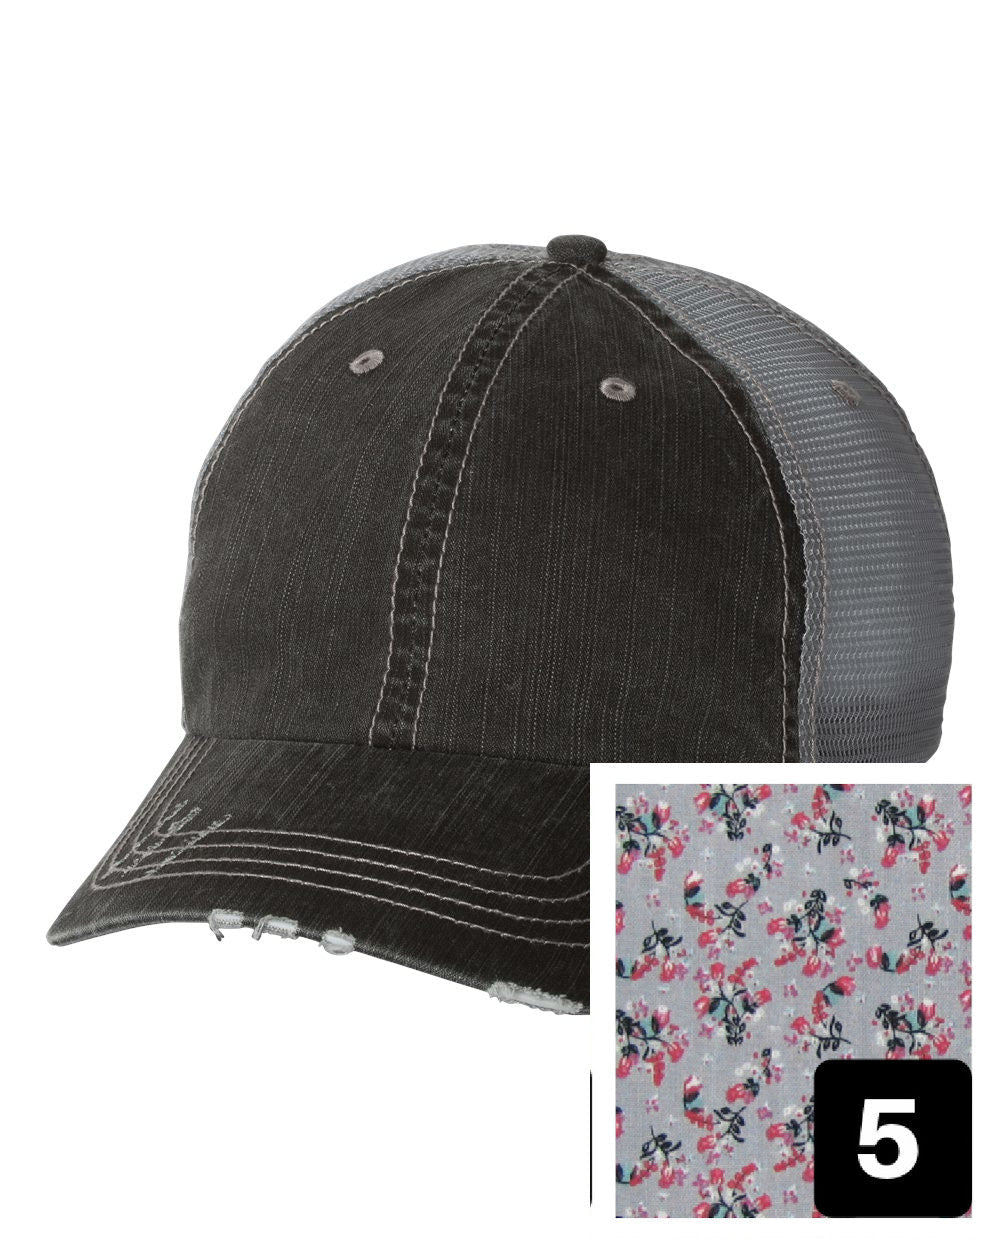 gray distressed trucker hat with purple and pink floral fabric state of Arizona